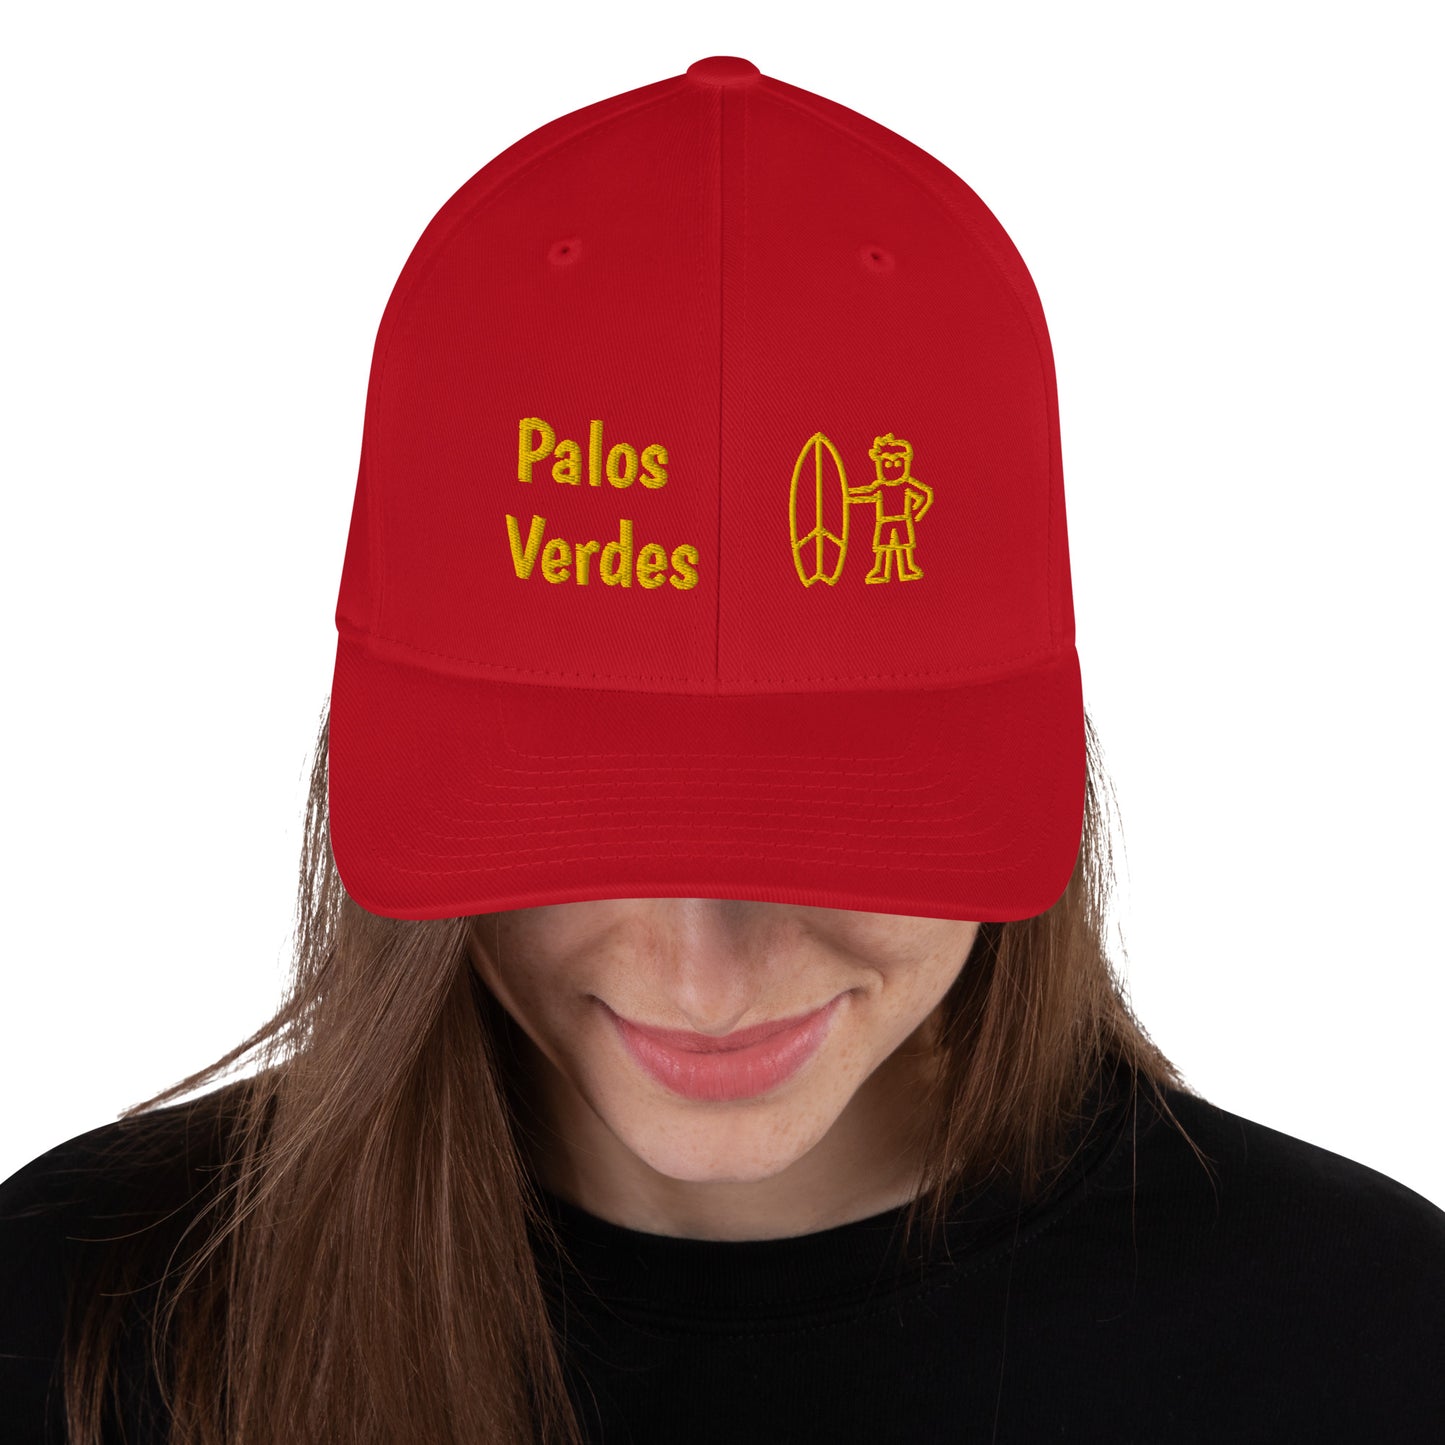 Palos Verdes Estates - California - 90274 - Structured Twill Cap (Printed Front and Back P.V.E.)